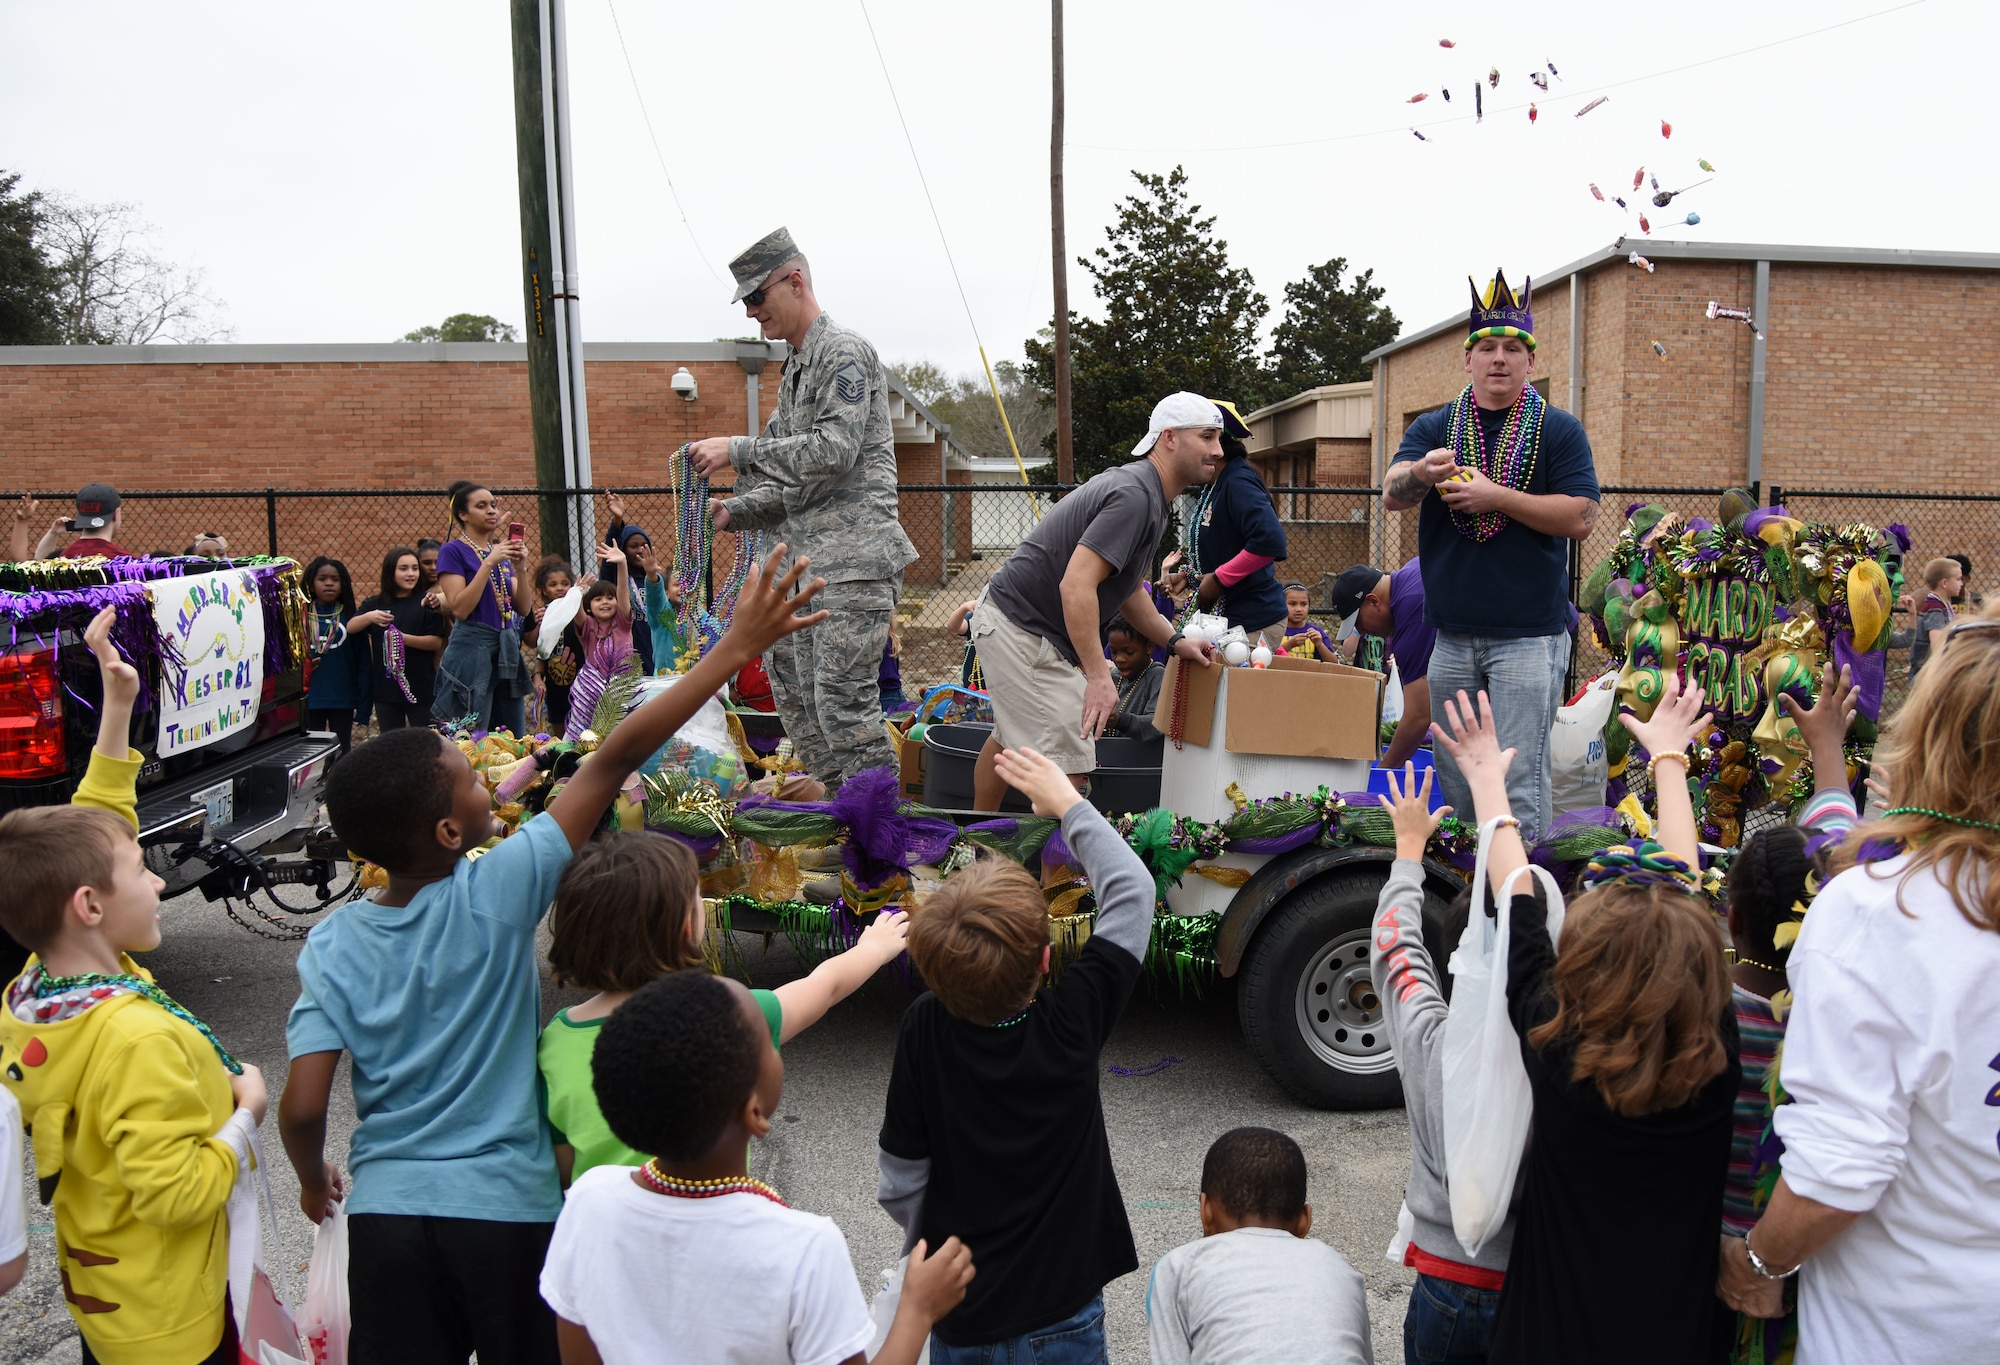 Keesler personnel toss candy and beads to children during the Jeff Davis Elementary School Mardi Gras parade Feb. 9, 2018, in Biloxi, Mississippi. Keesler leadership and other base personnel also participated in the festivities. (U.S. Air Force photo by Kemberly Groue)